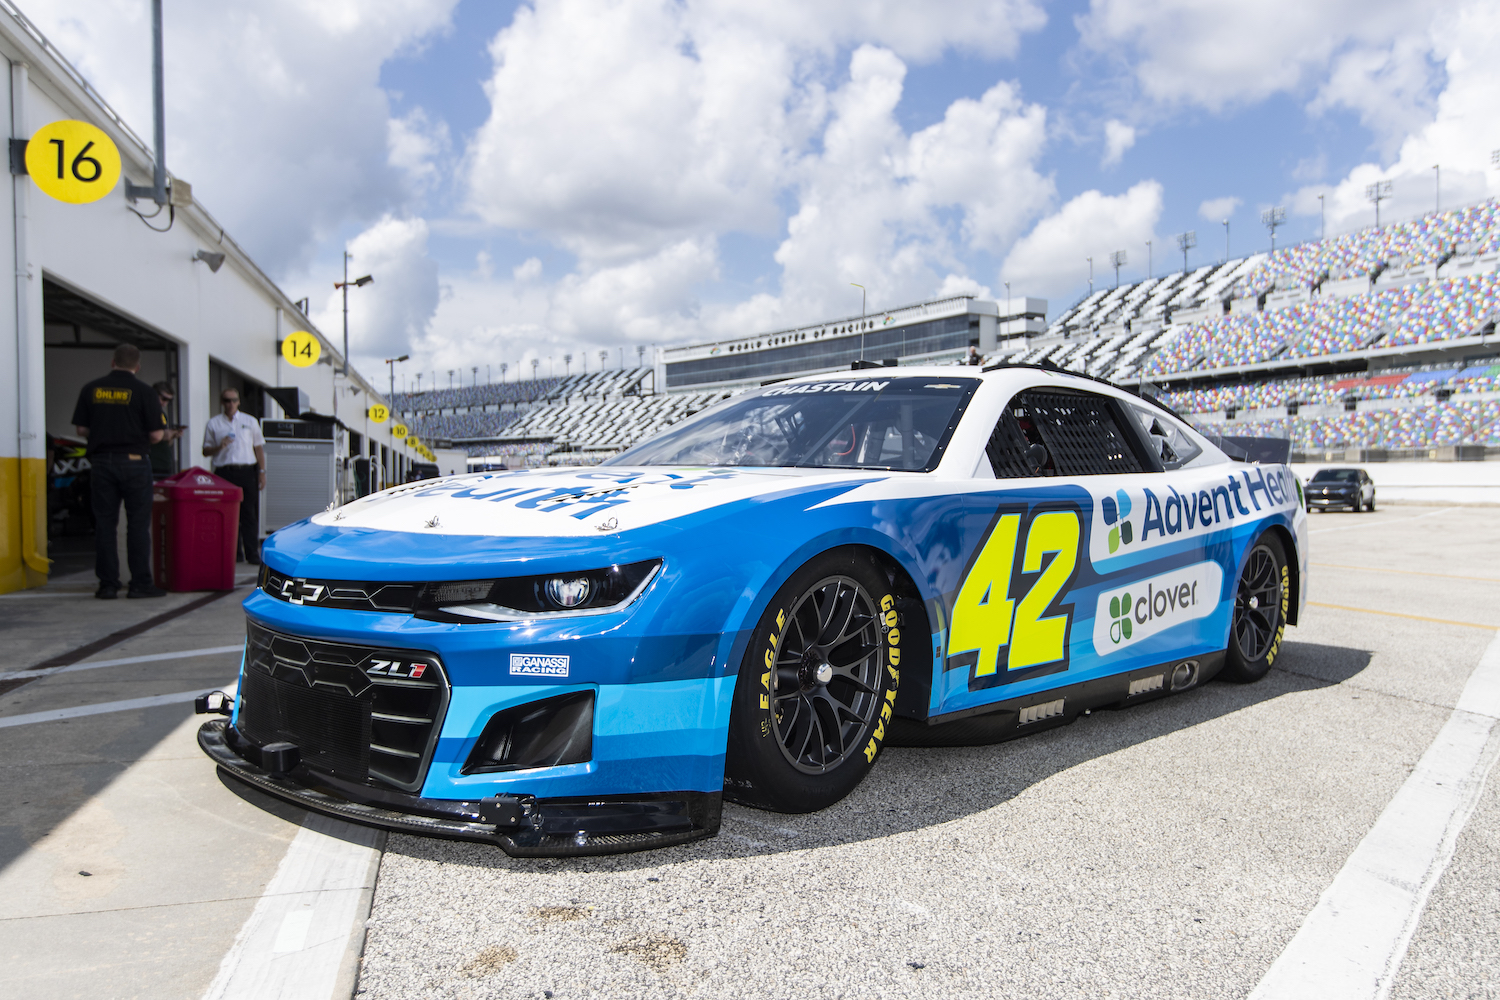 This is Ross Chastain's #42 NASCAR Next Gen car parked in the Daytona pits during testing. The V8 NASCAR engines powering the Next Gen cars will be allowed to make hundreds more horsepower to battle the advanced aerodynamics of the new vehicles. | James Gilbert/Getty Images